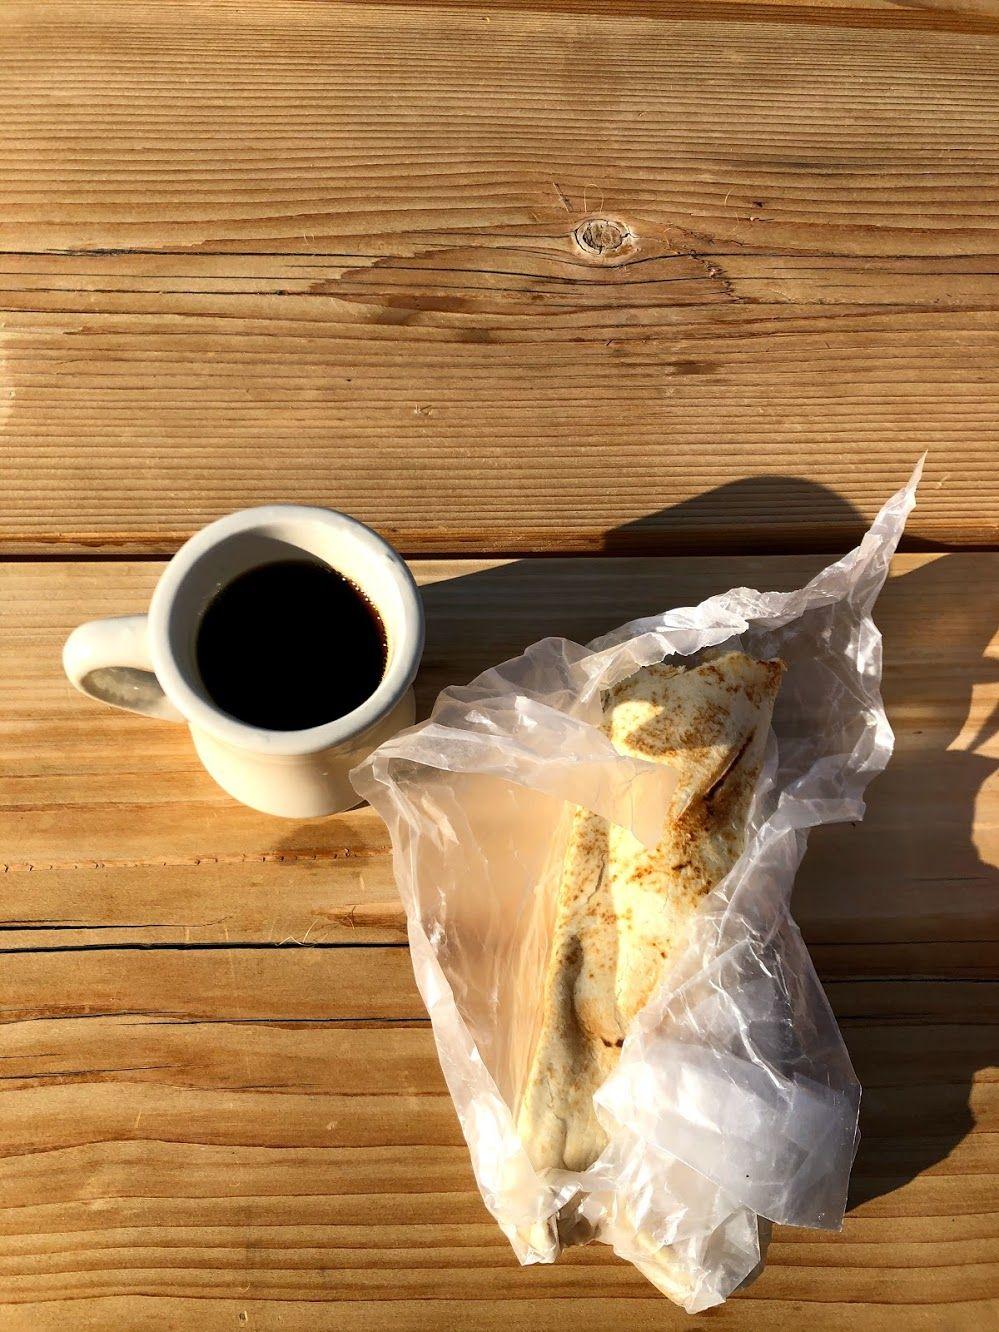 A large burrito sitting on a table, loosely wrapped in paper. A mug of coffee sits next to it.